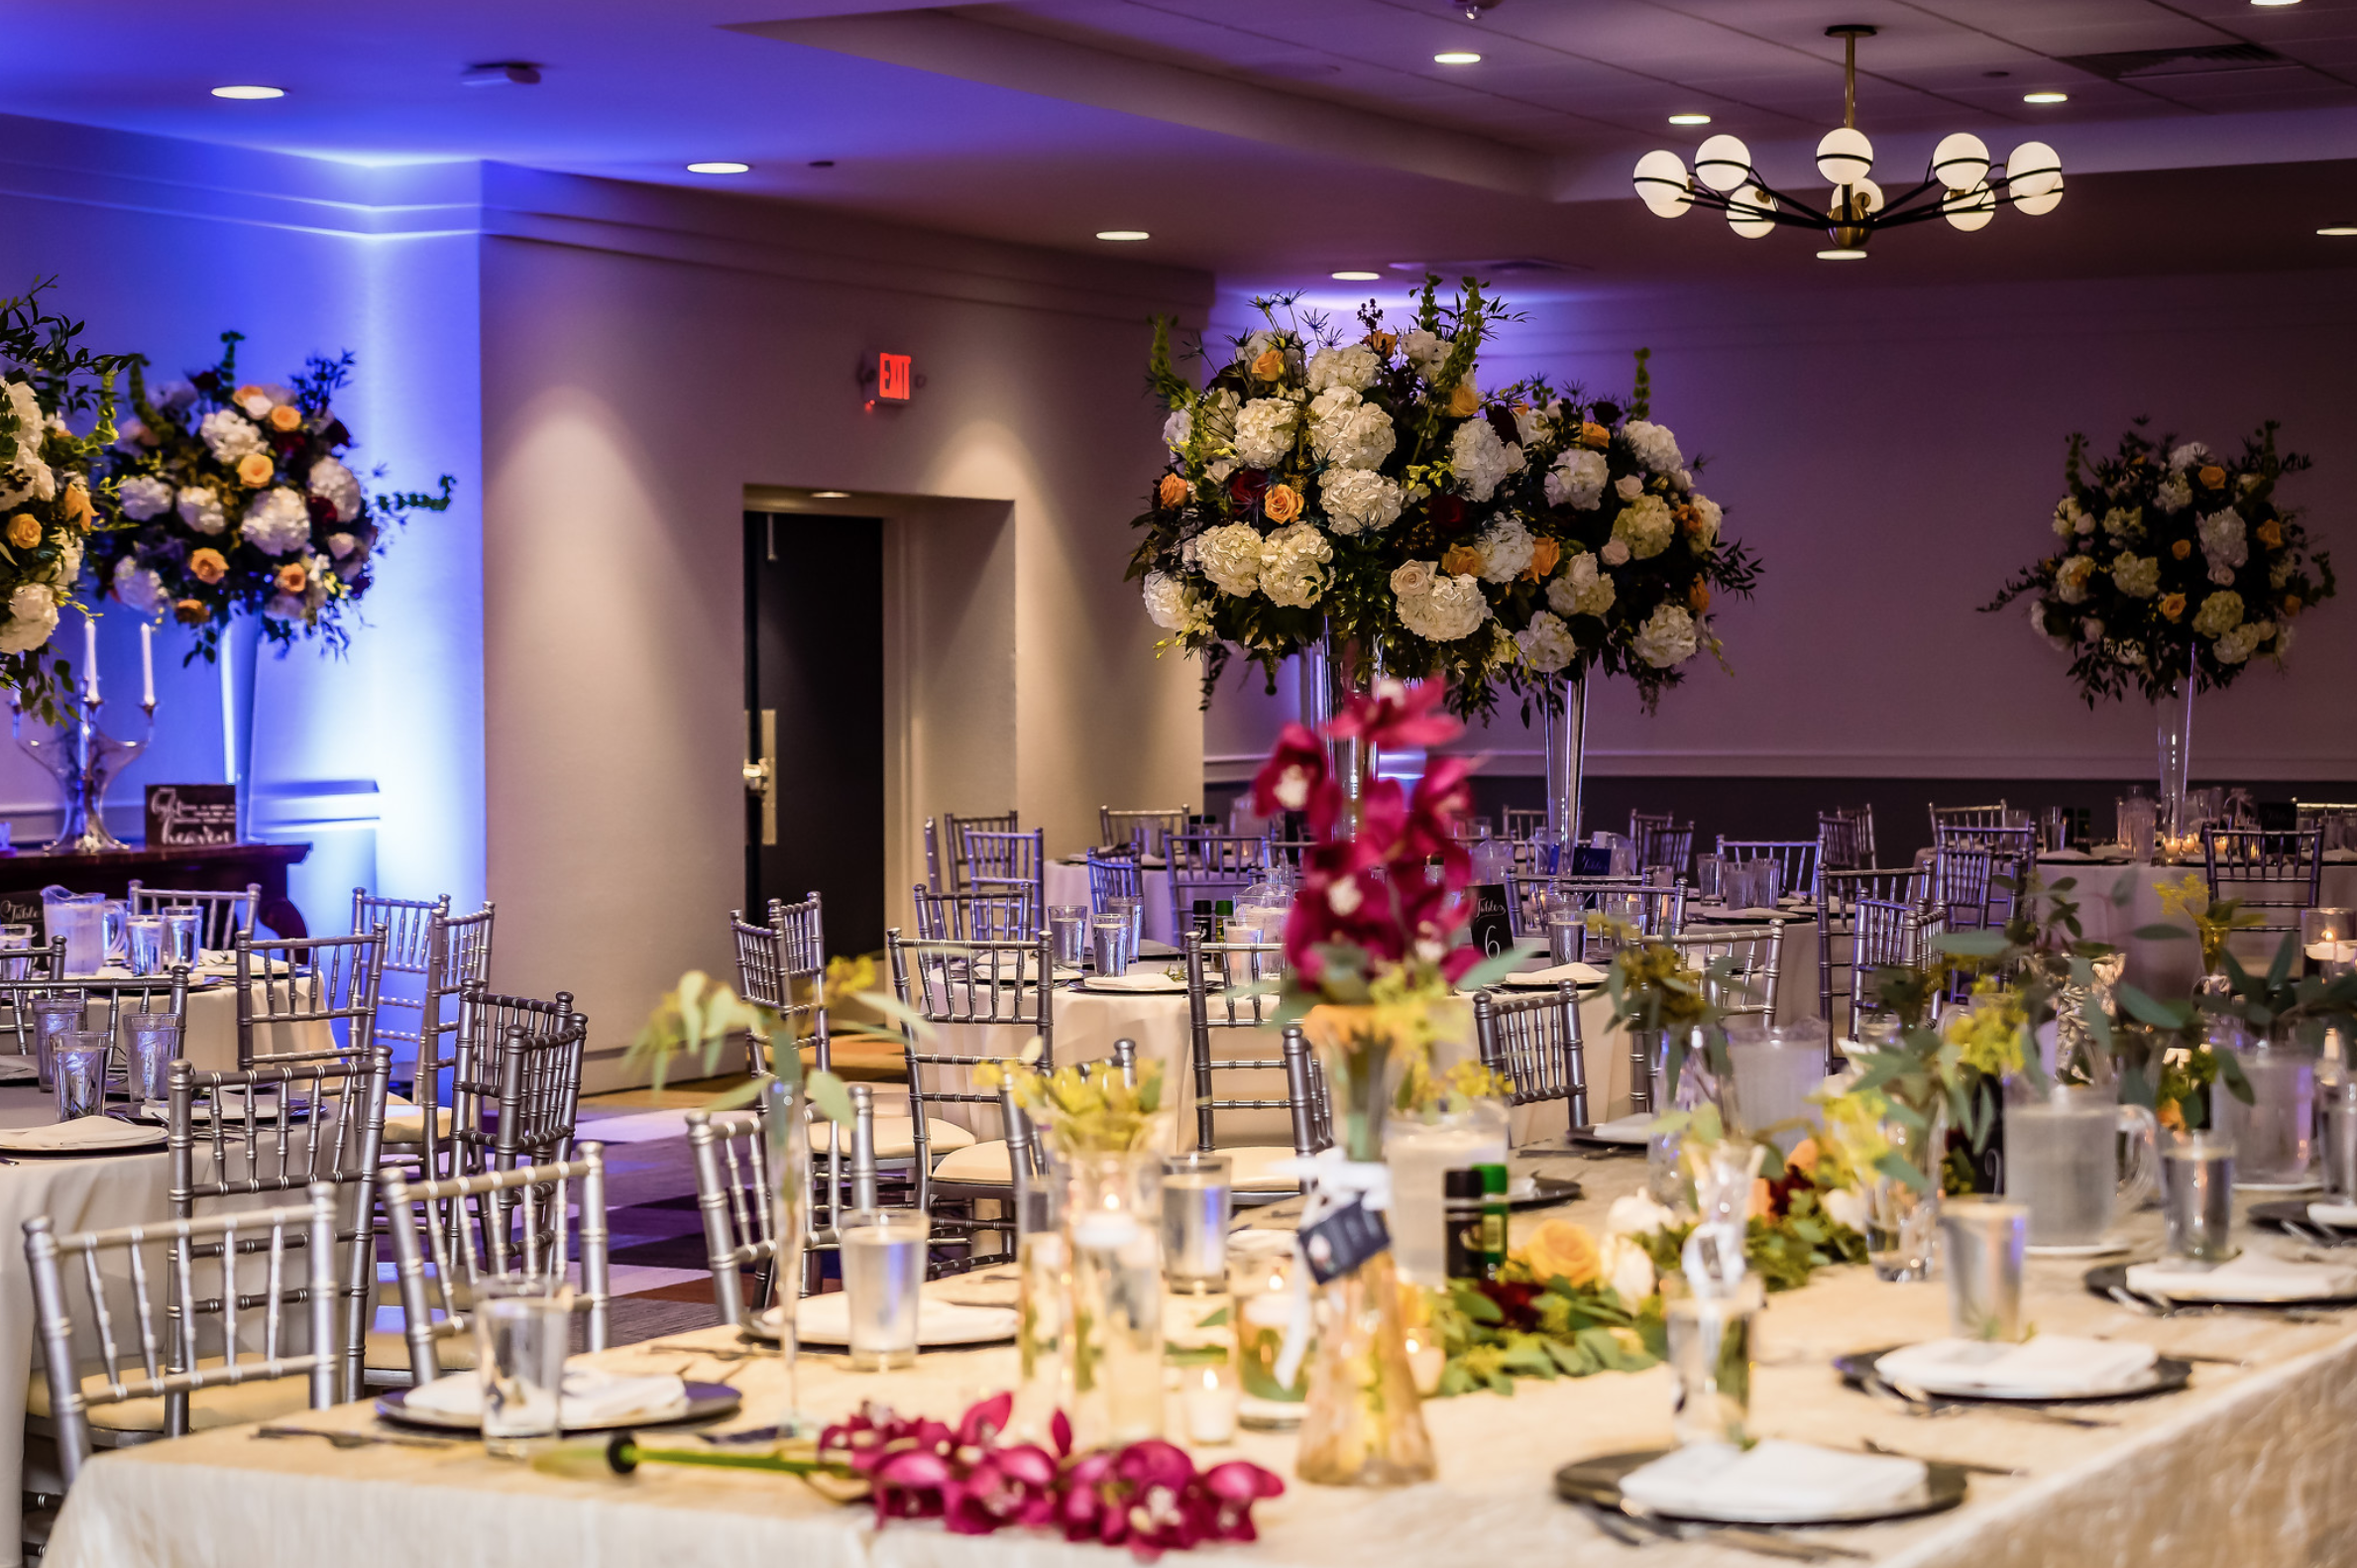 place settings and floral arrangements on long reception table and banquet rounds